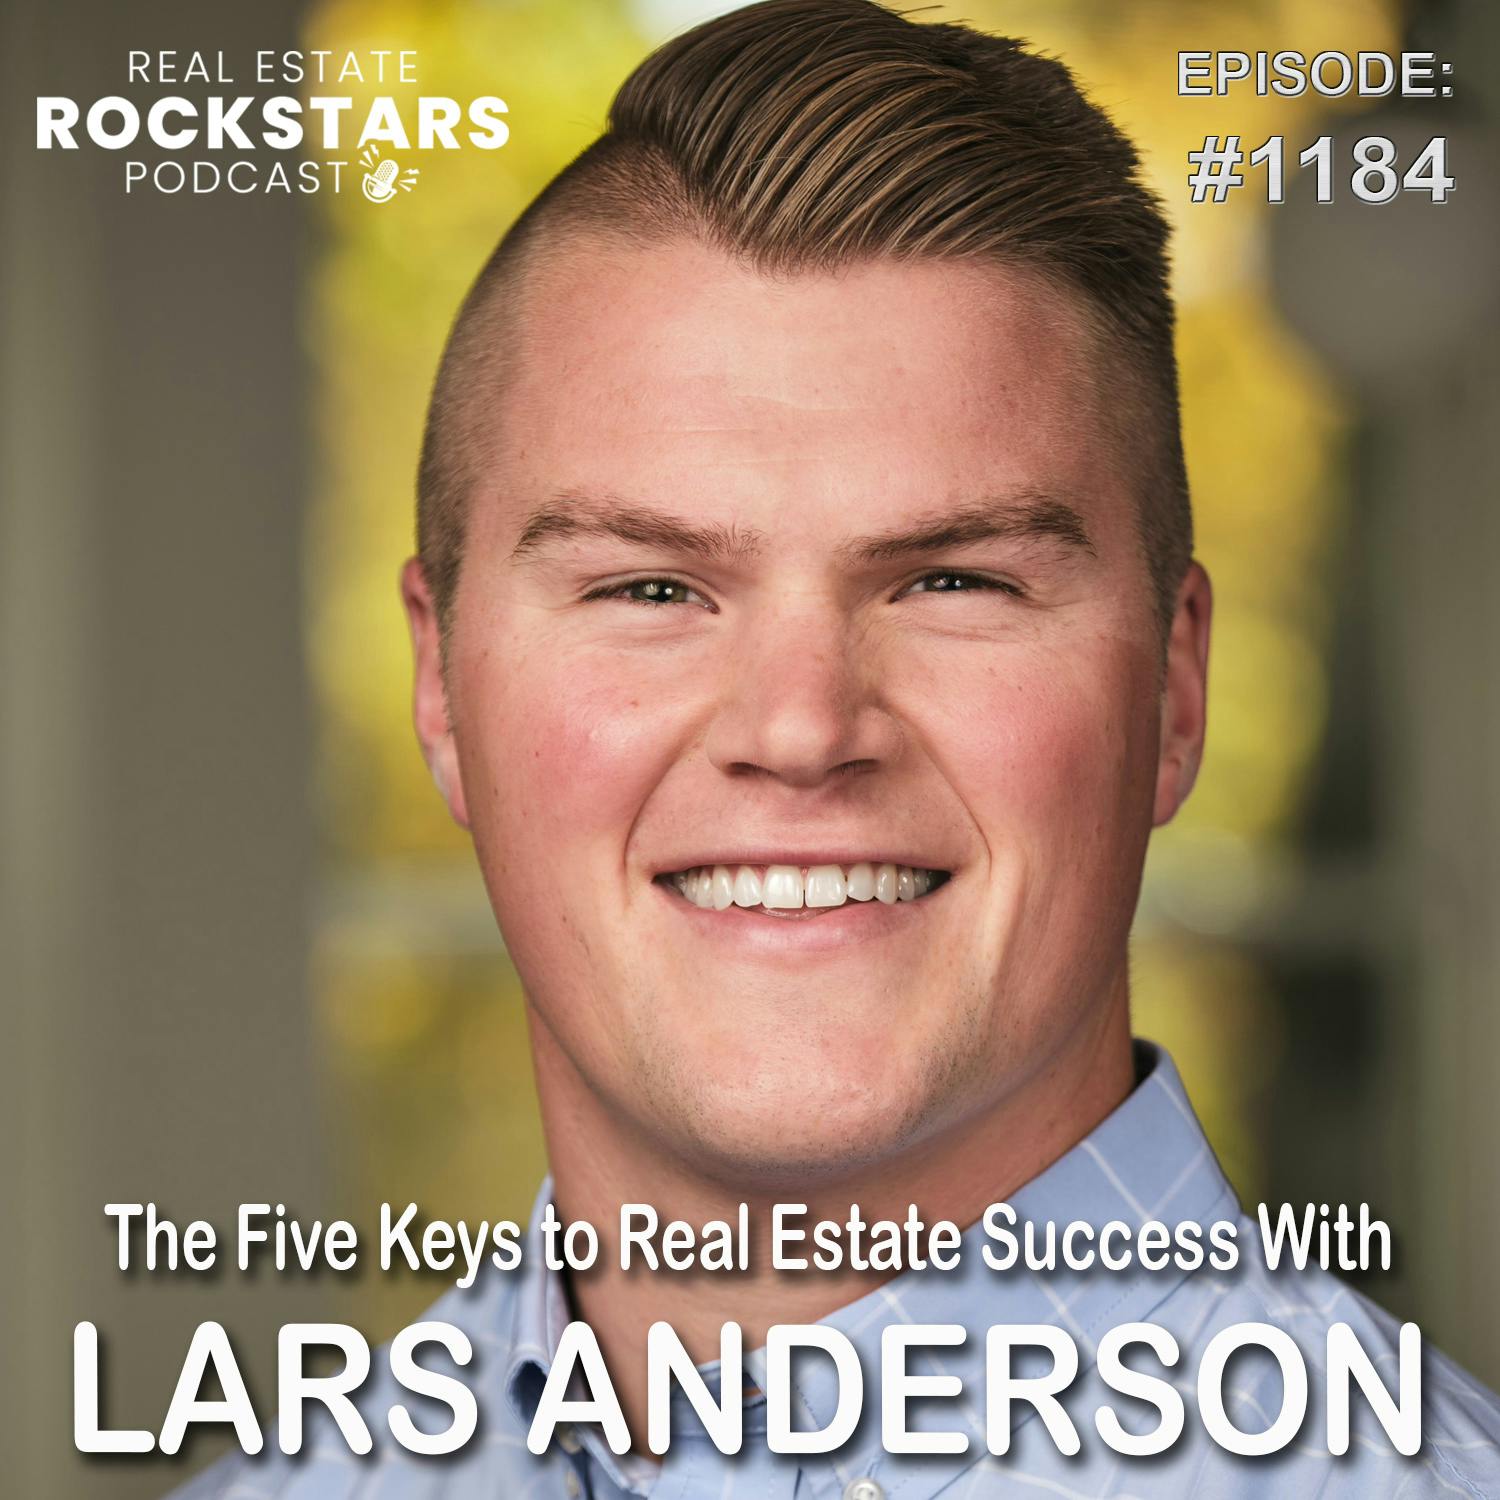 1184: The Five Keys to Real Estate Success With Lars Anderson